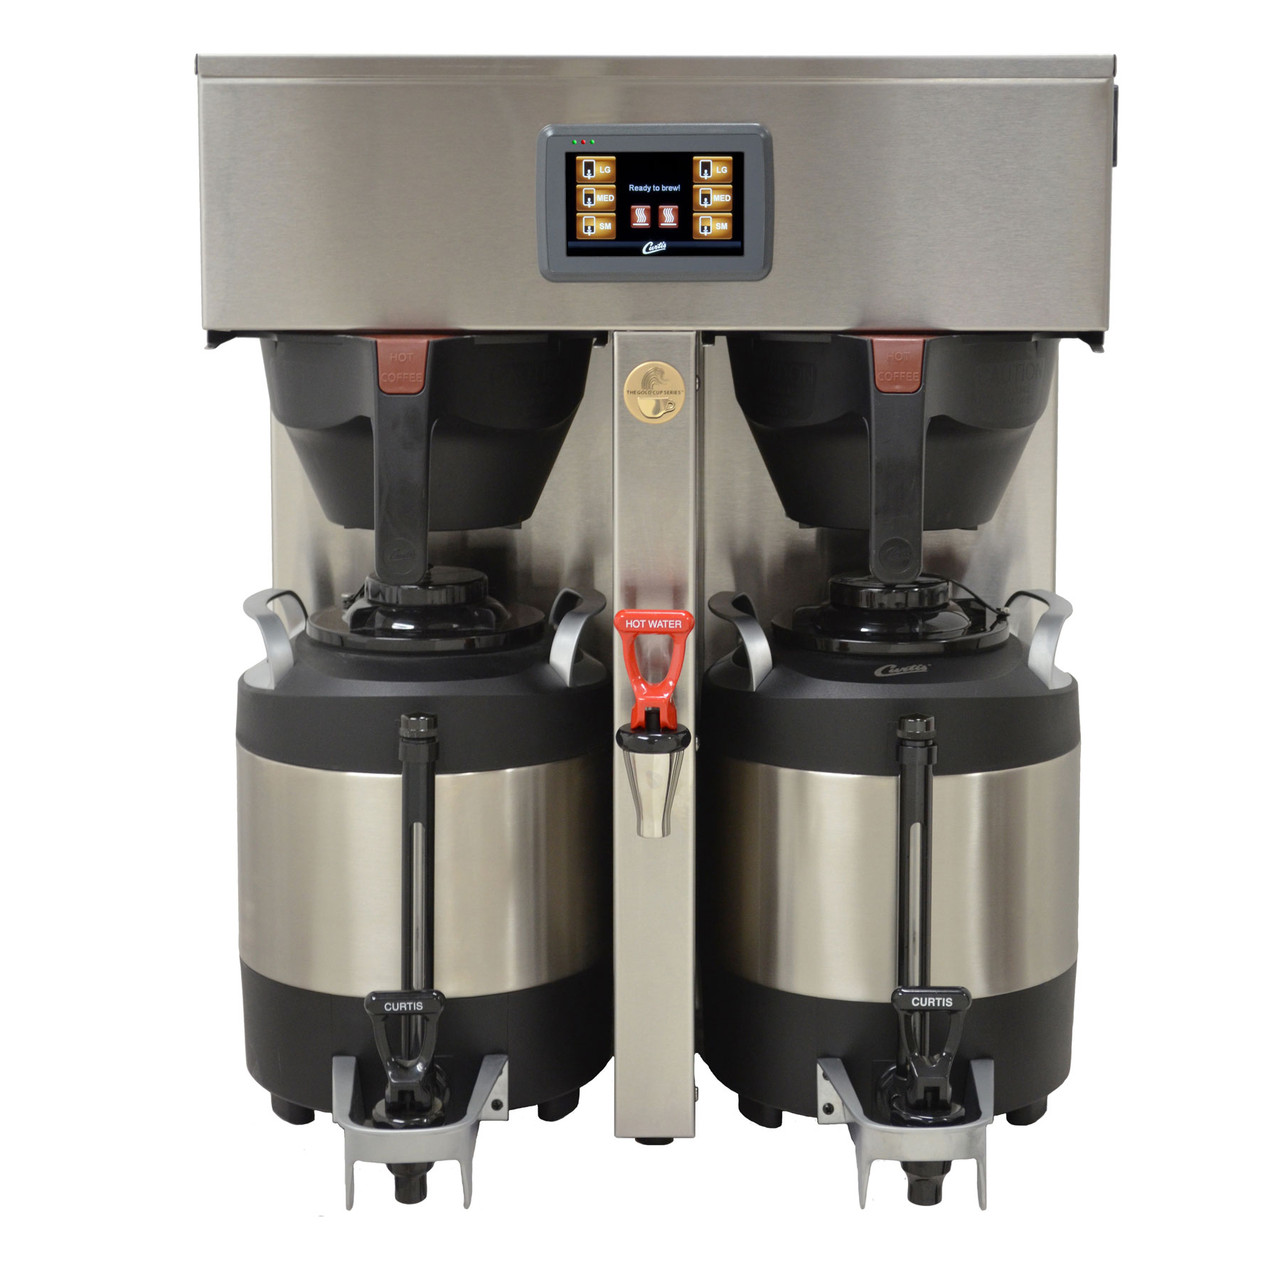 https://cdn11.bigcommerce.com/s-6h7ychjk4/products/8115/images/89006/curtis-g4-one-gallon-brewer-twin__39512.1597181055.1280.1280.jpg?c=1